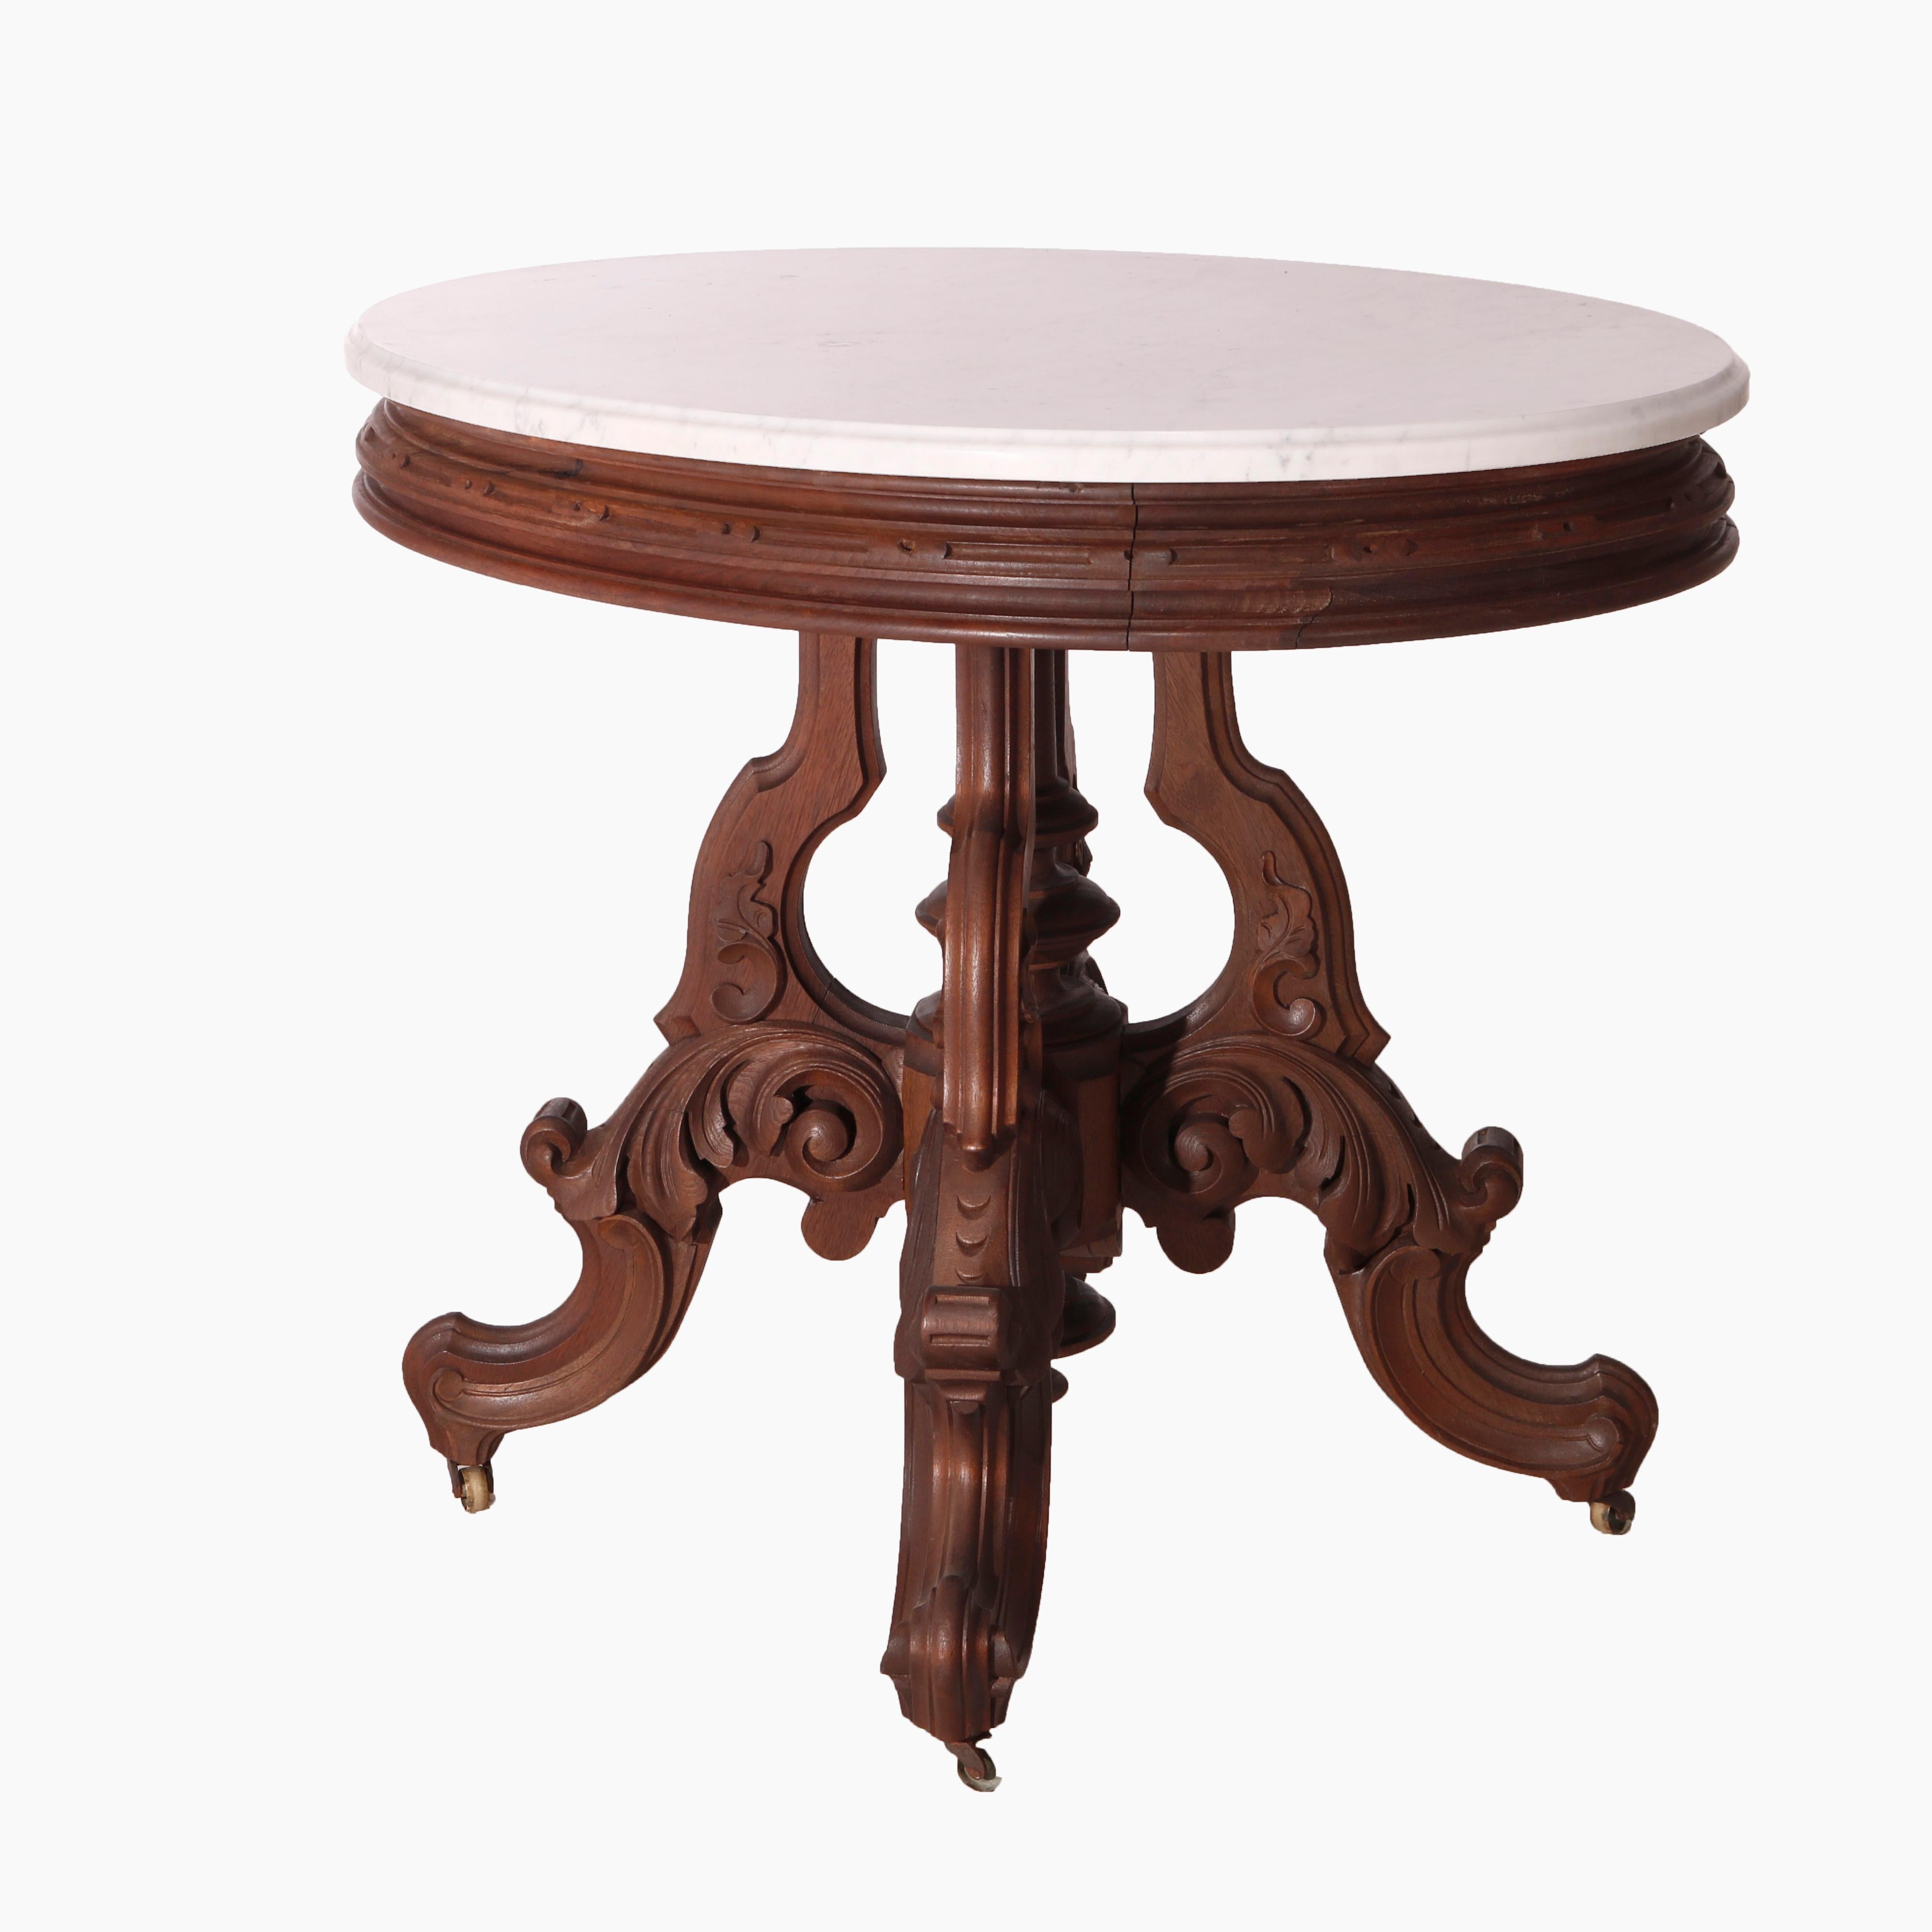 Oversized Antique Victorian Walnut Brooks Oval Marble Top Parlor Table 1890 For Sale 3